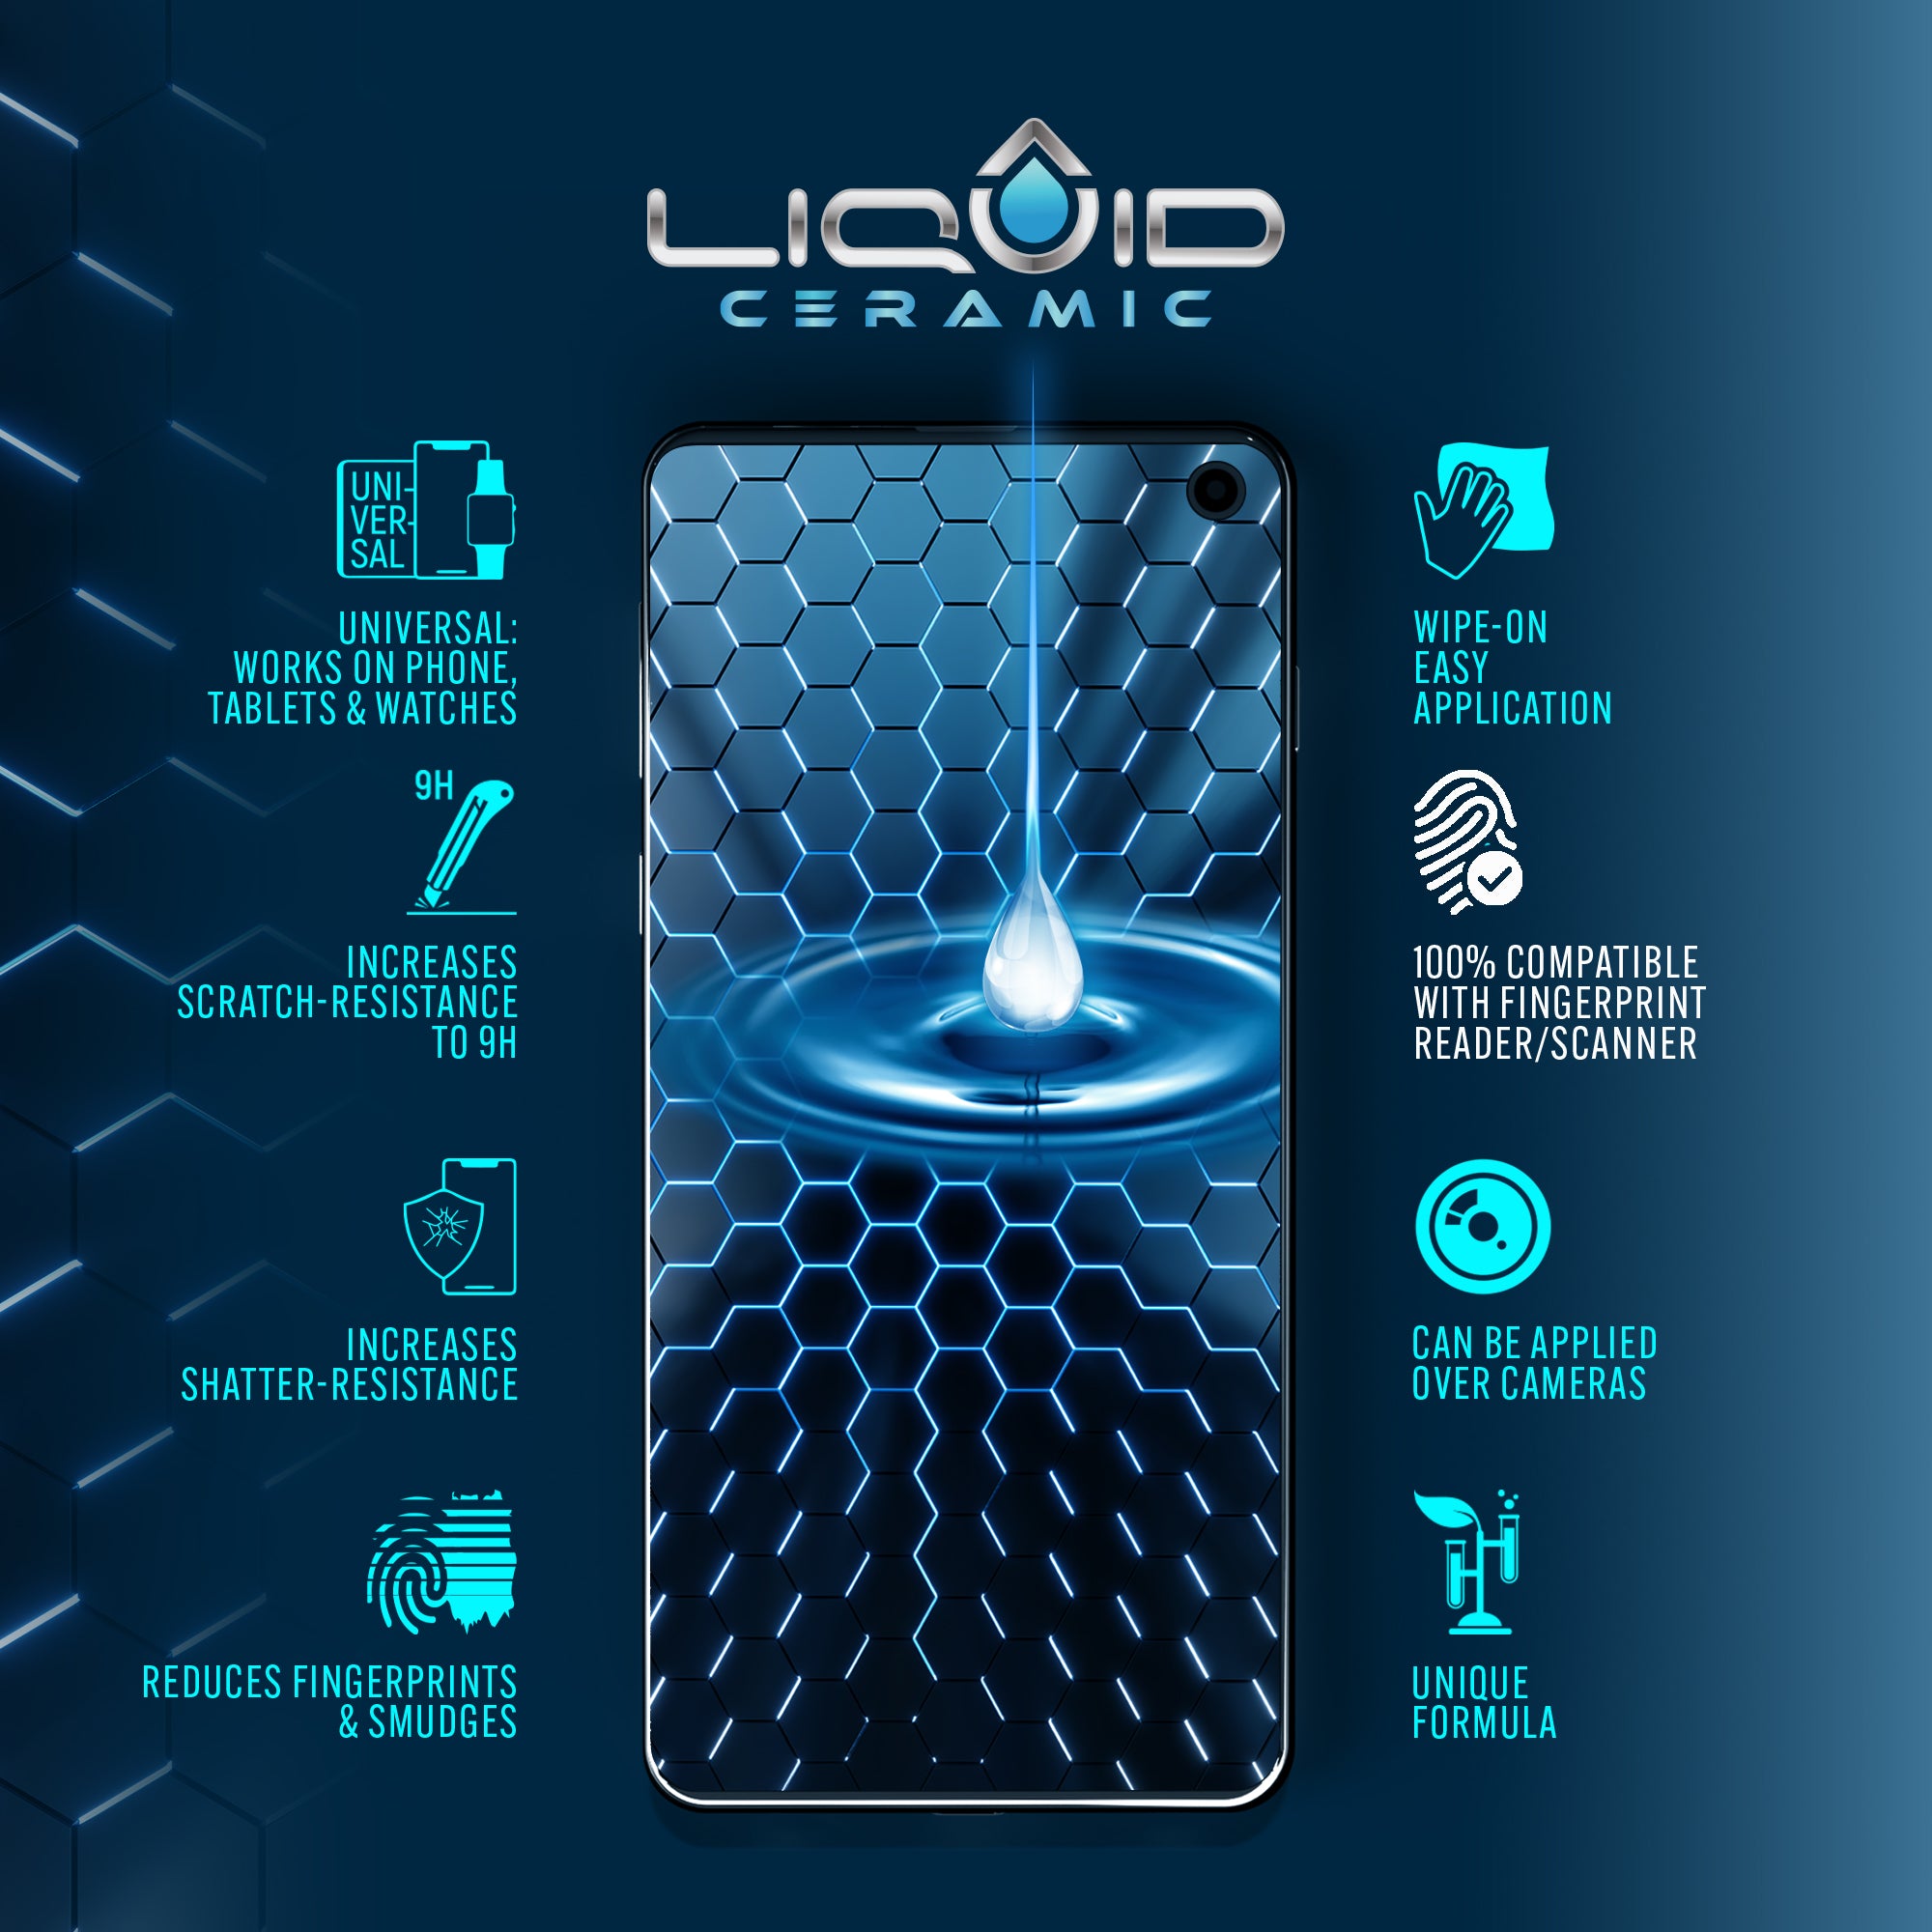 Liquid Ceramic Screen Protector with $400 Guarantee for All Phones Tablets and Smart Watches